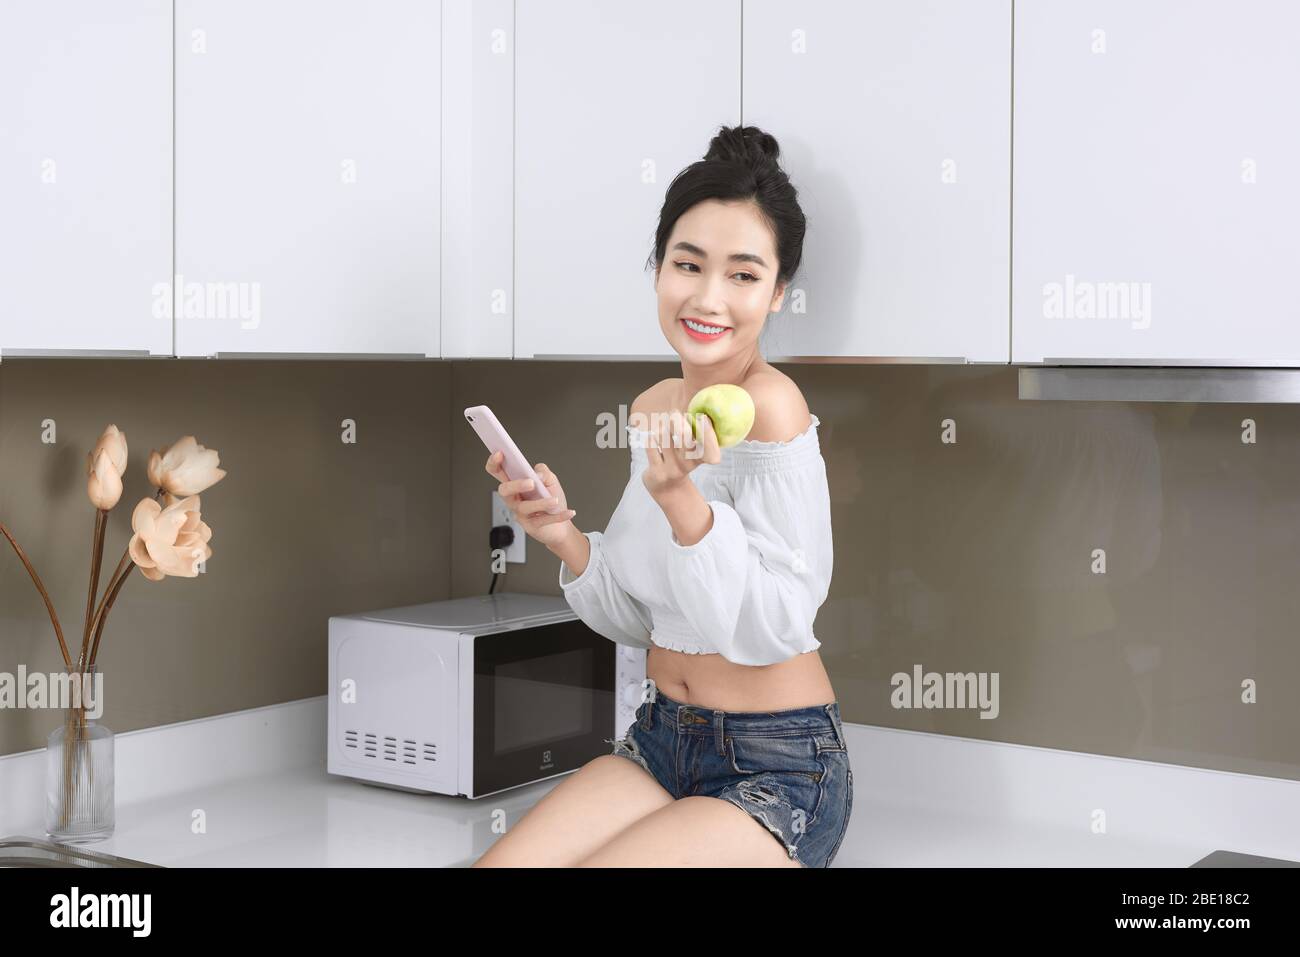 Smiling pretty Asian woman looking at mobile phone and holding an apple in kitchen. Stock Photo